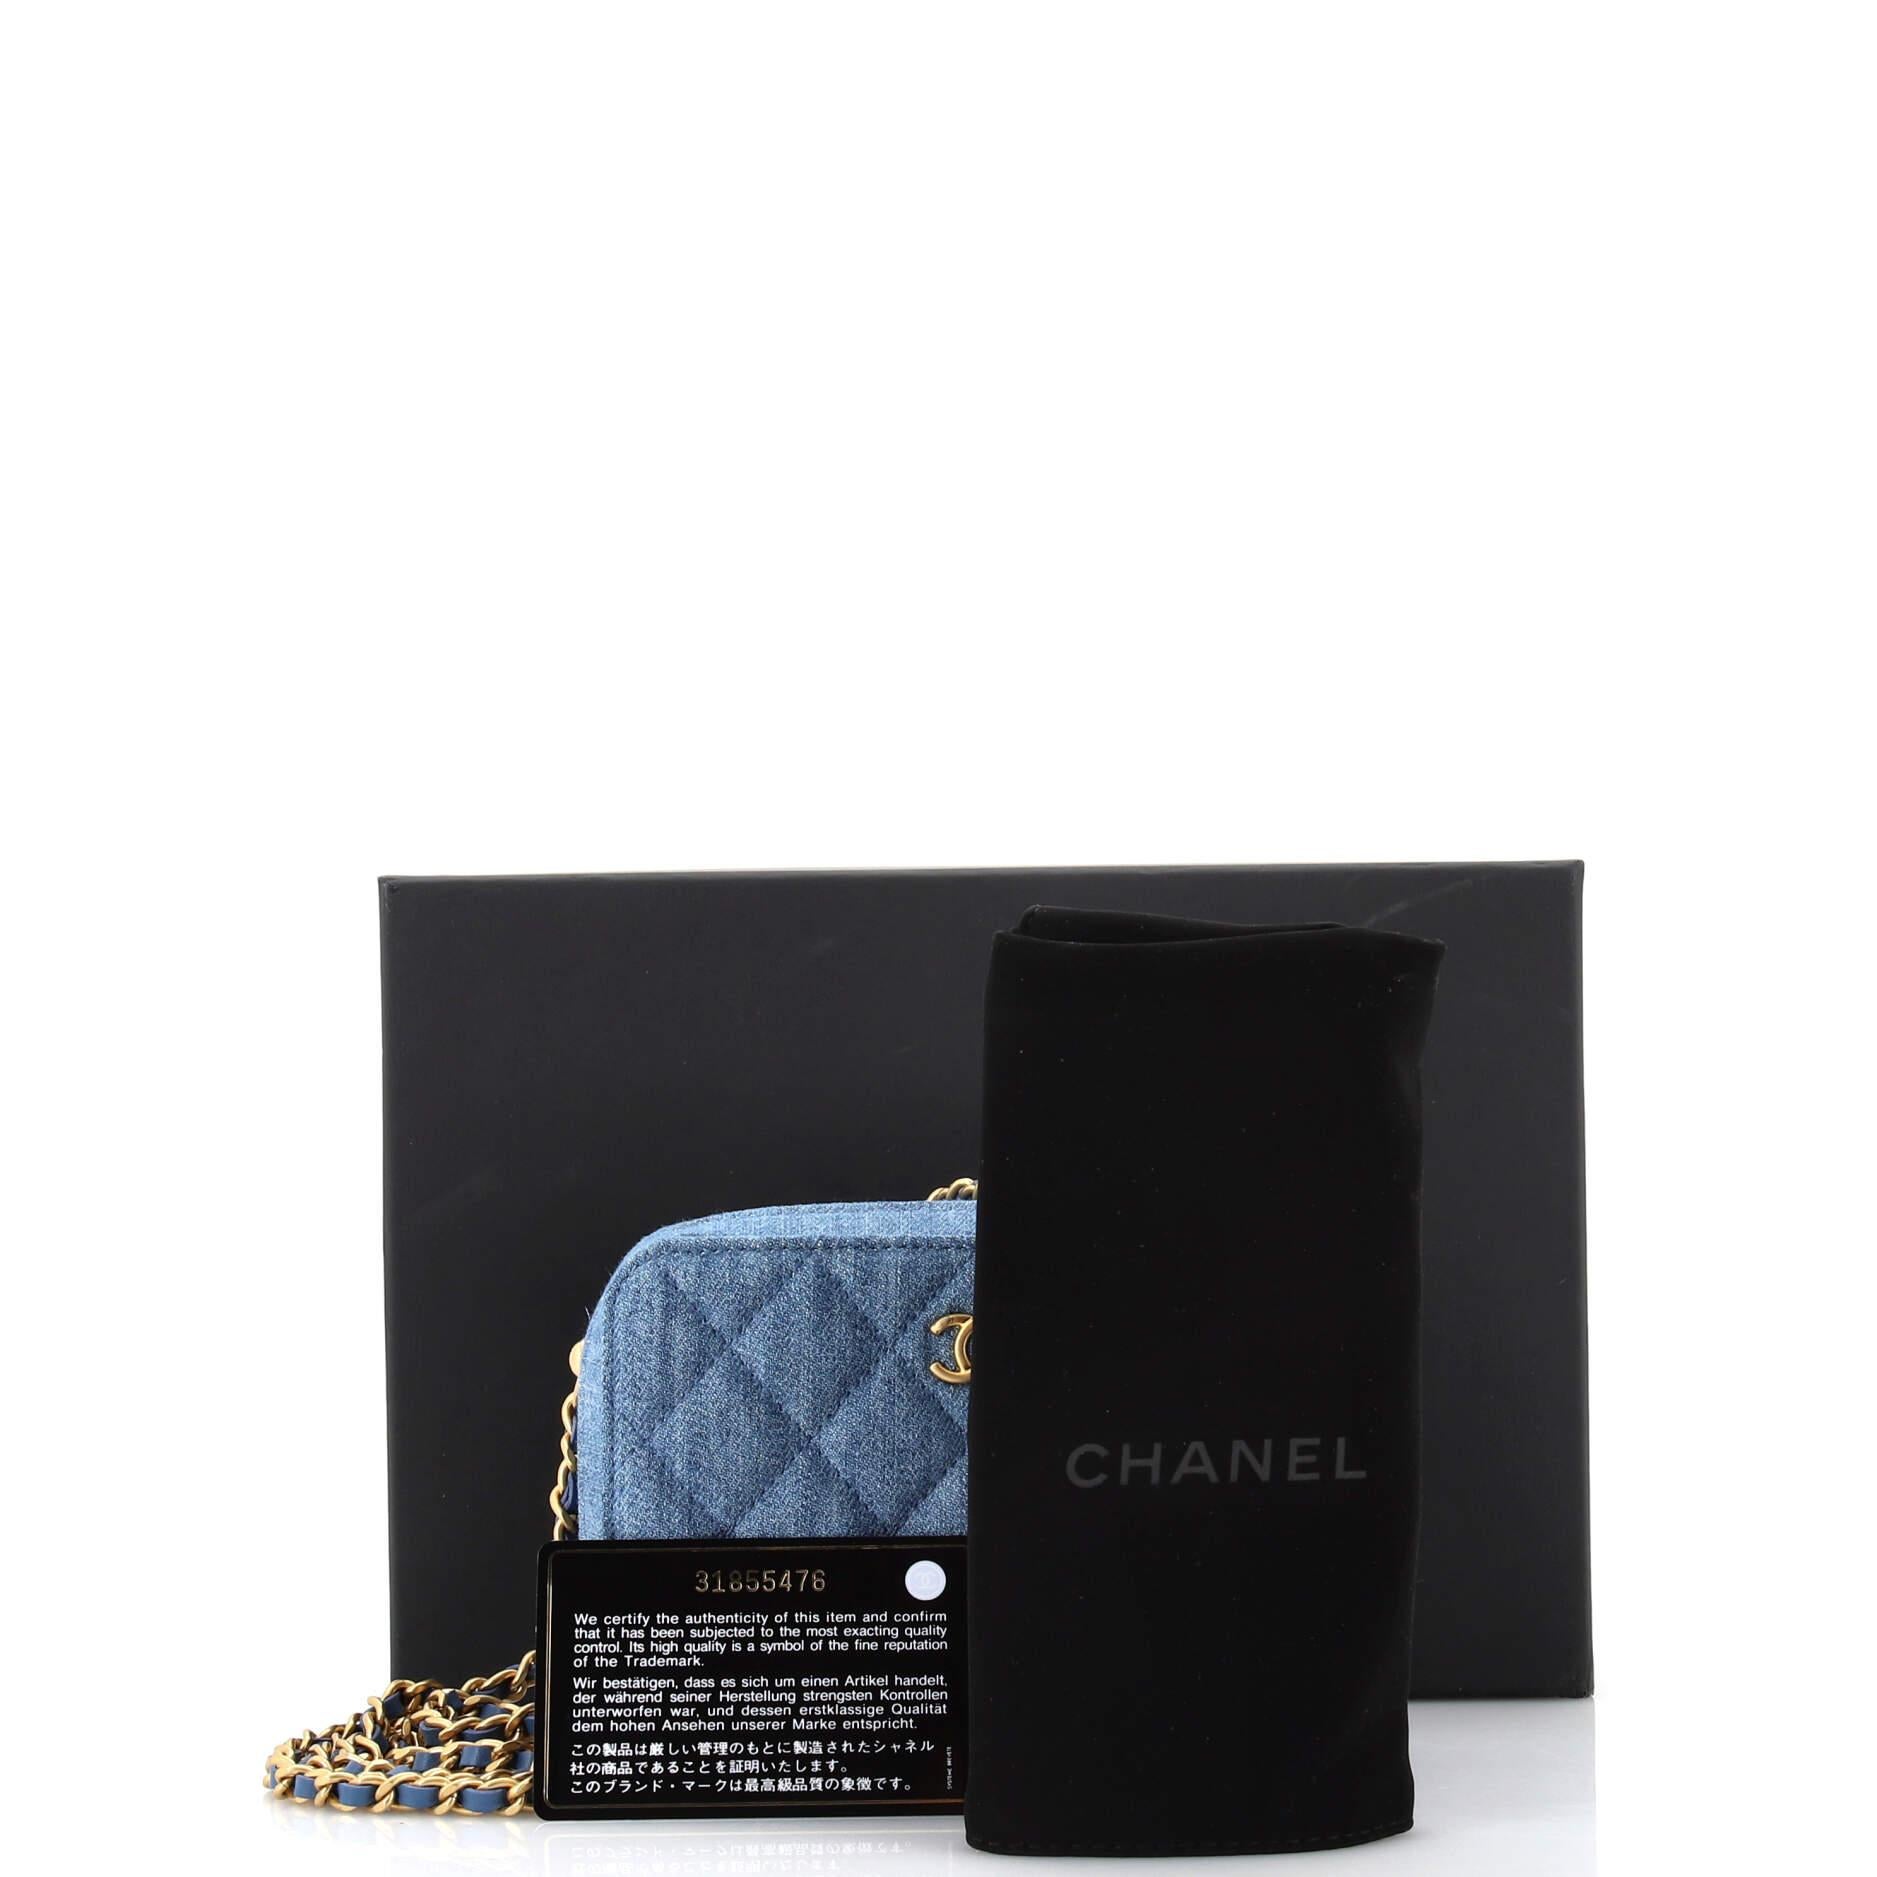 Chanel Mini Vanity With Chain - 7 For Sale on 1stDibs  chanel vanity with  chain 2021, chanel black crochet vanity with chain, chanel mini vanity with  handle